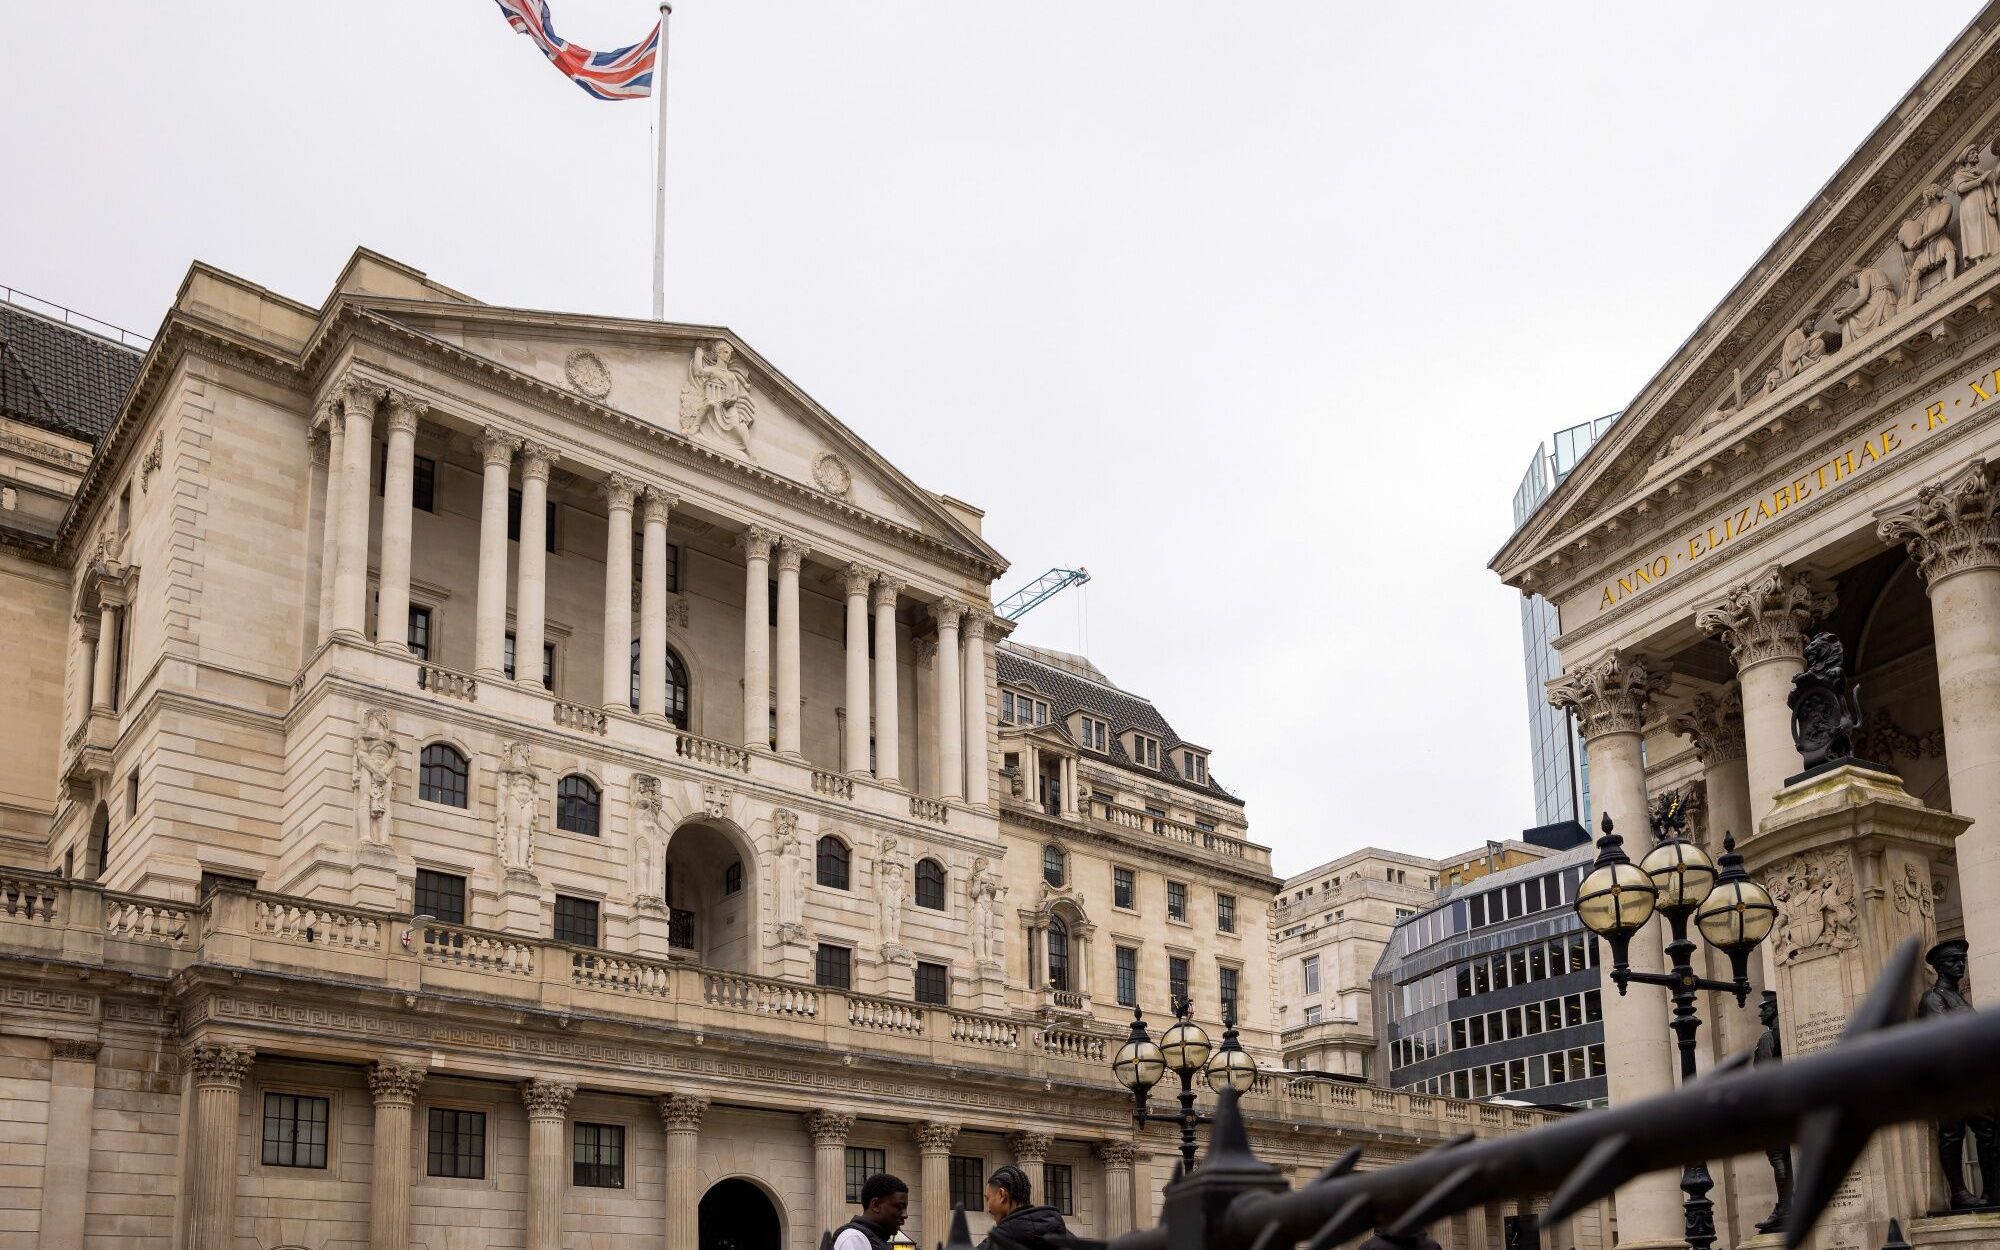 taxpayer to fork out £85bn to cover bank of england losses